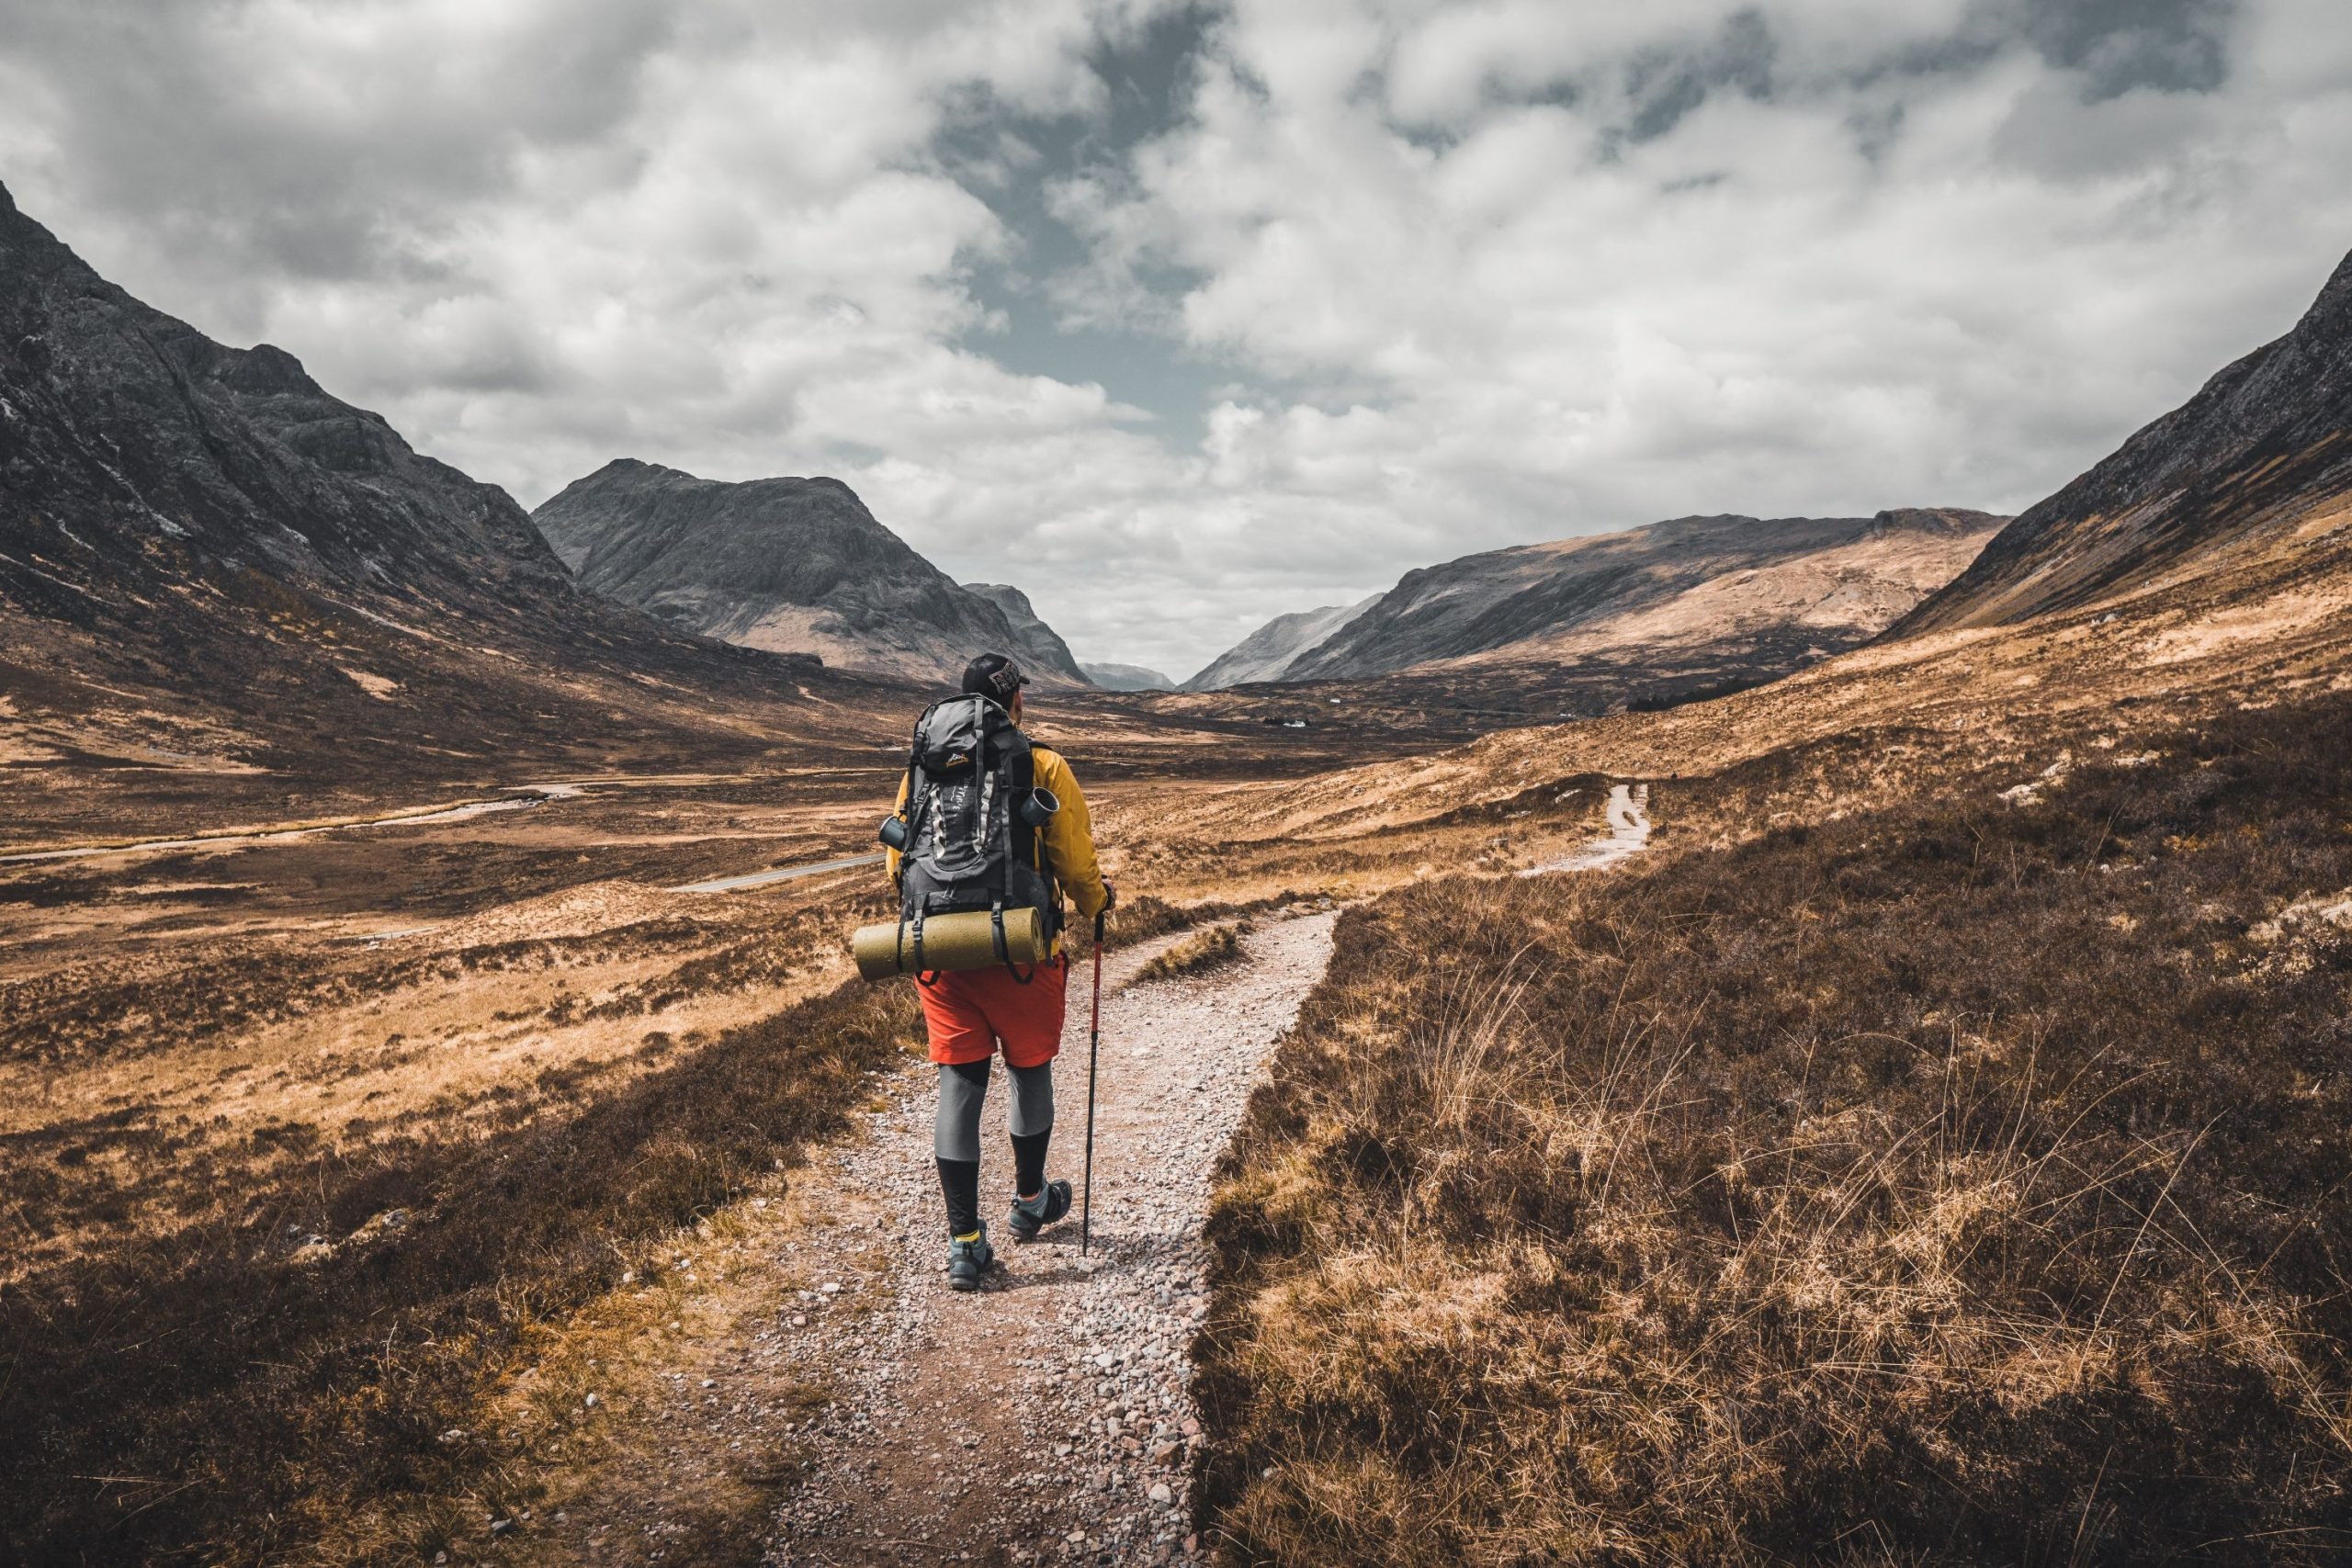 A hiker on the route into Fort William from Kingshouse on the West Highland Way.